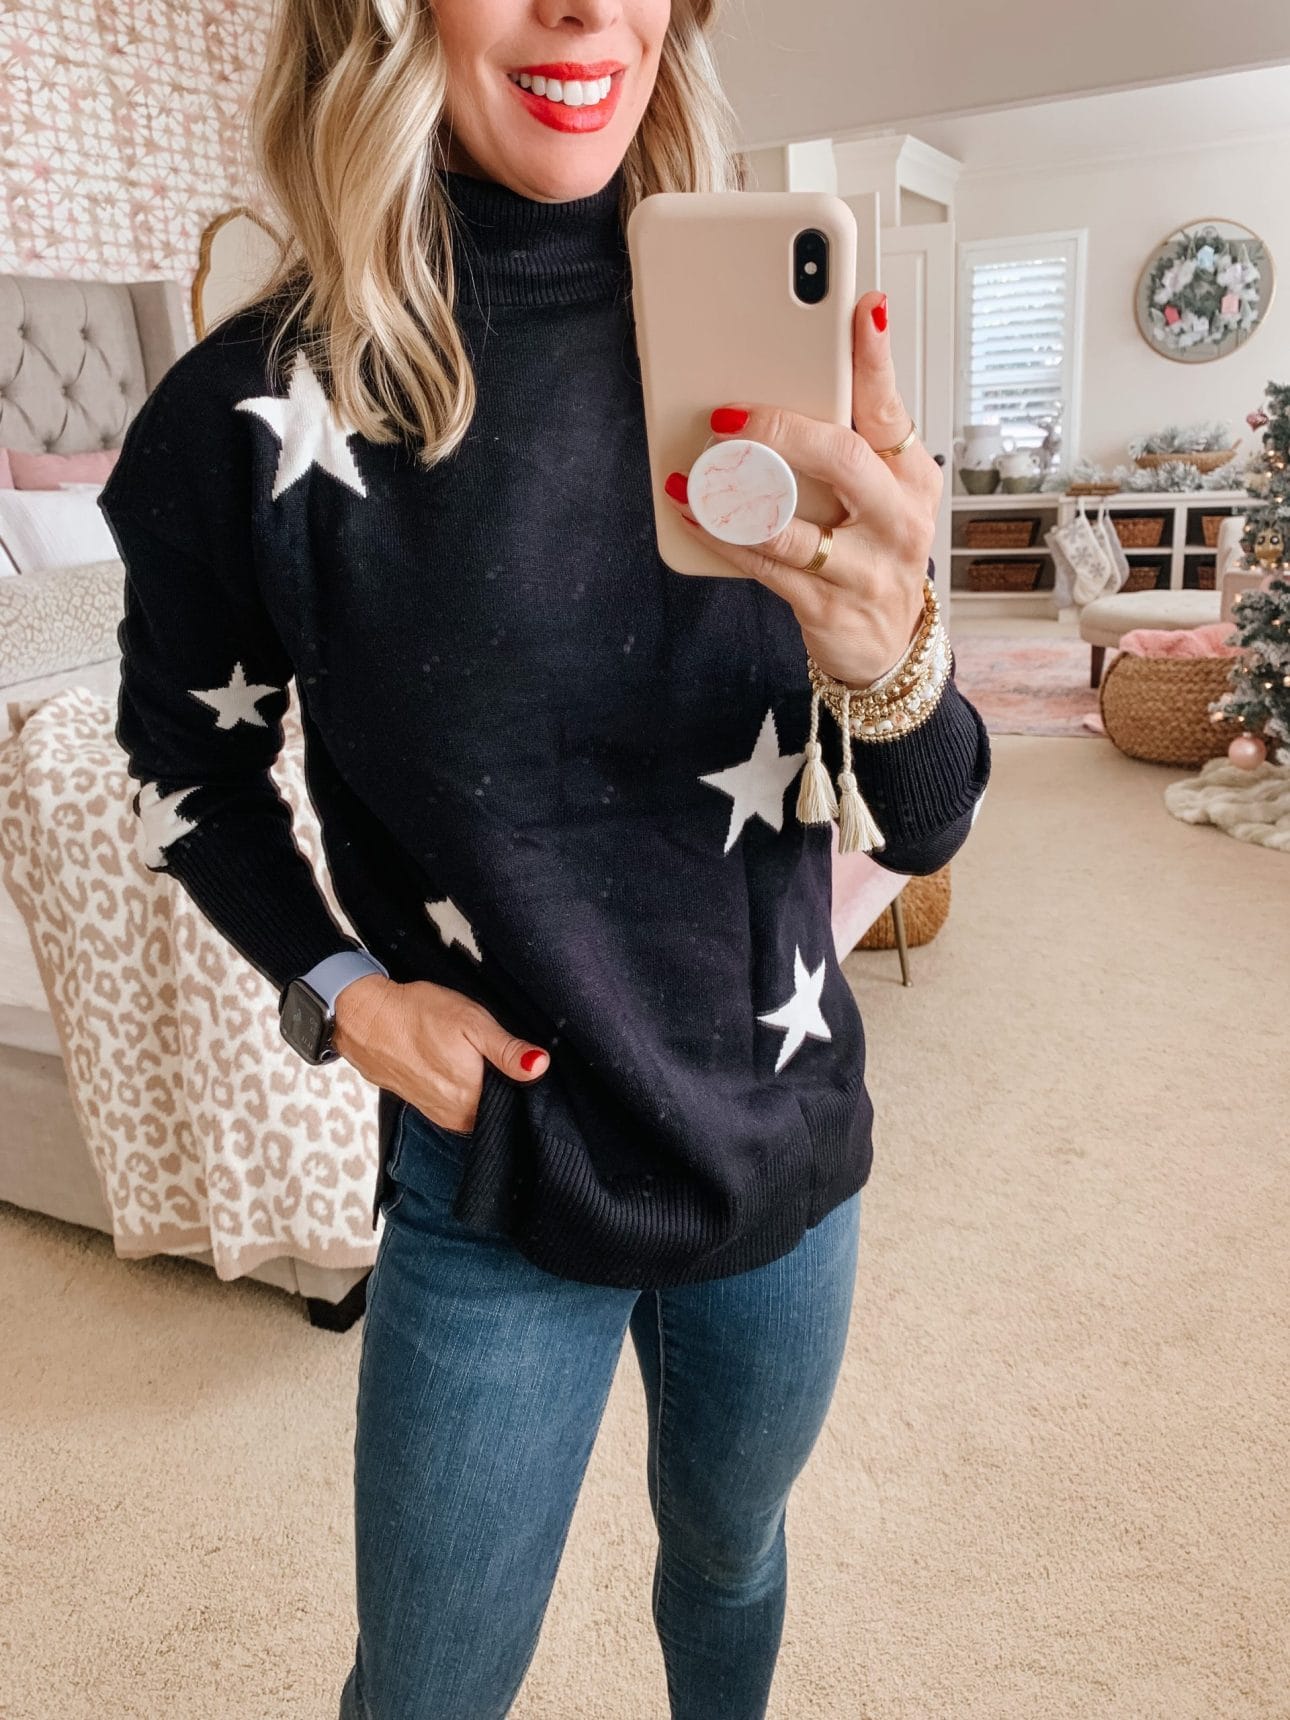 Amazon Fashion, Star Sweater, Jeans, Booties 